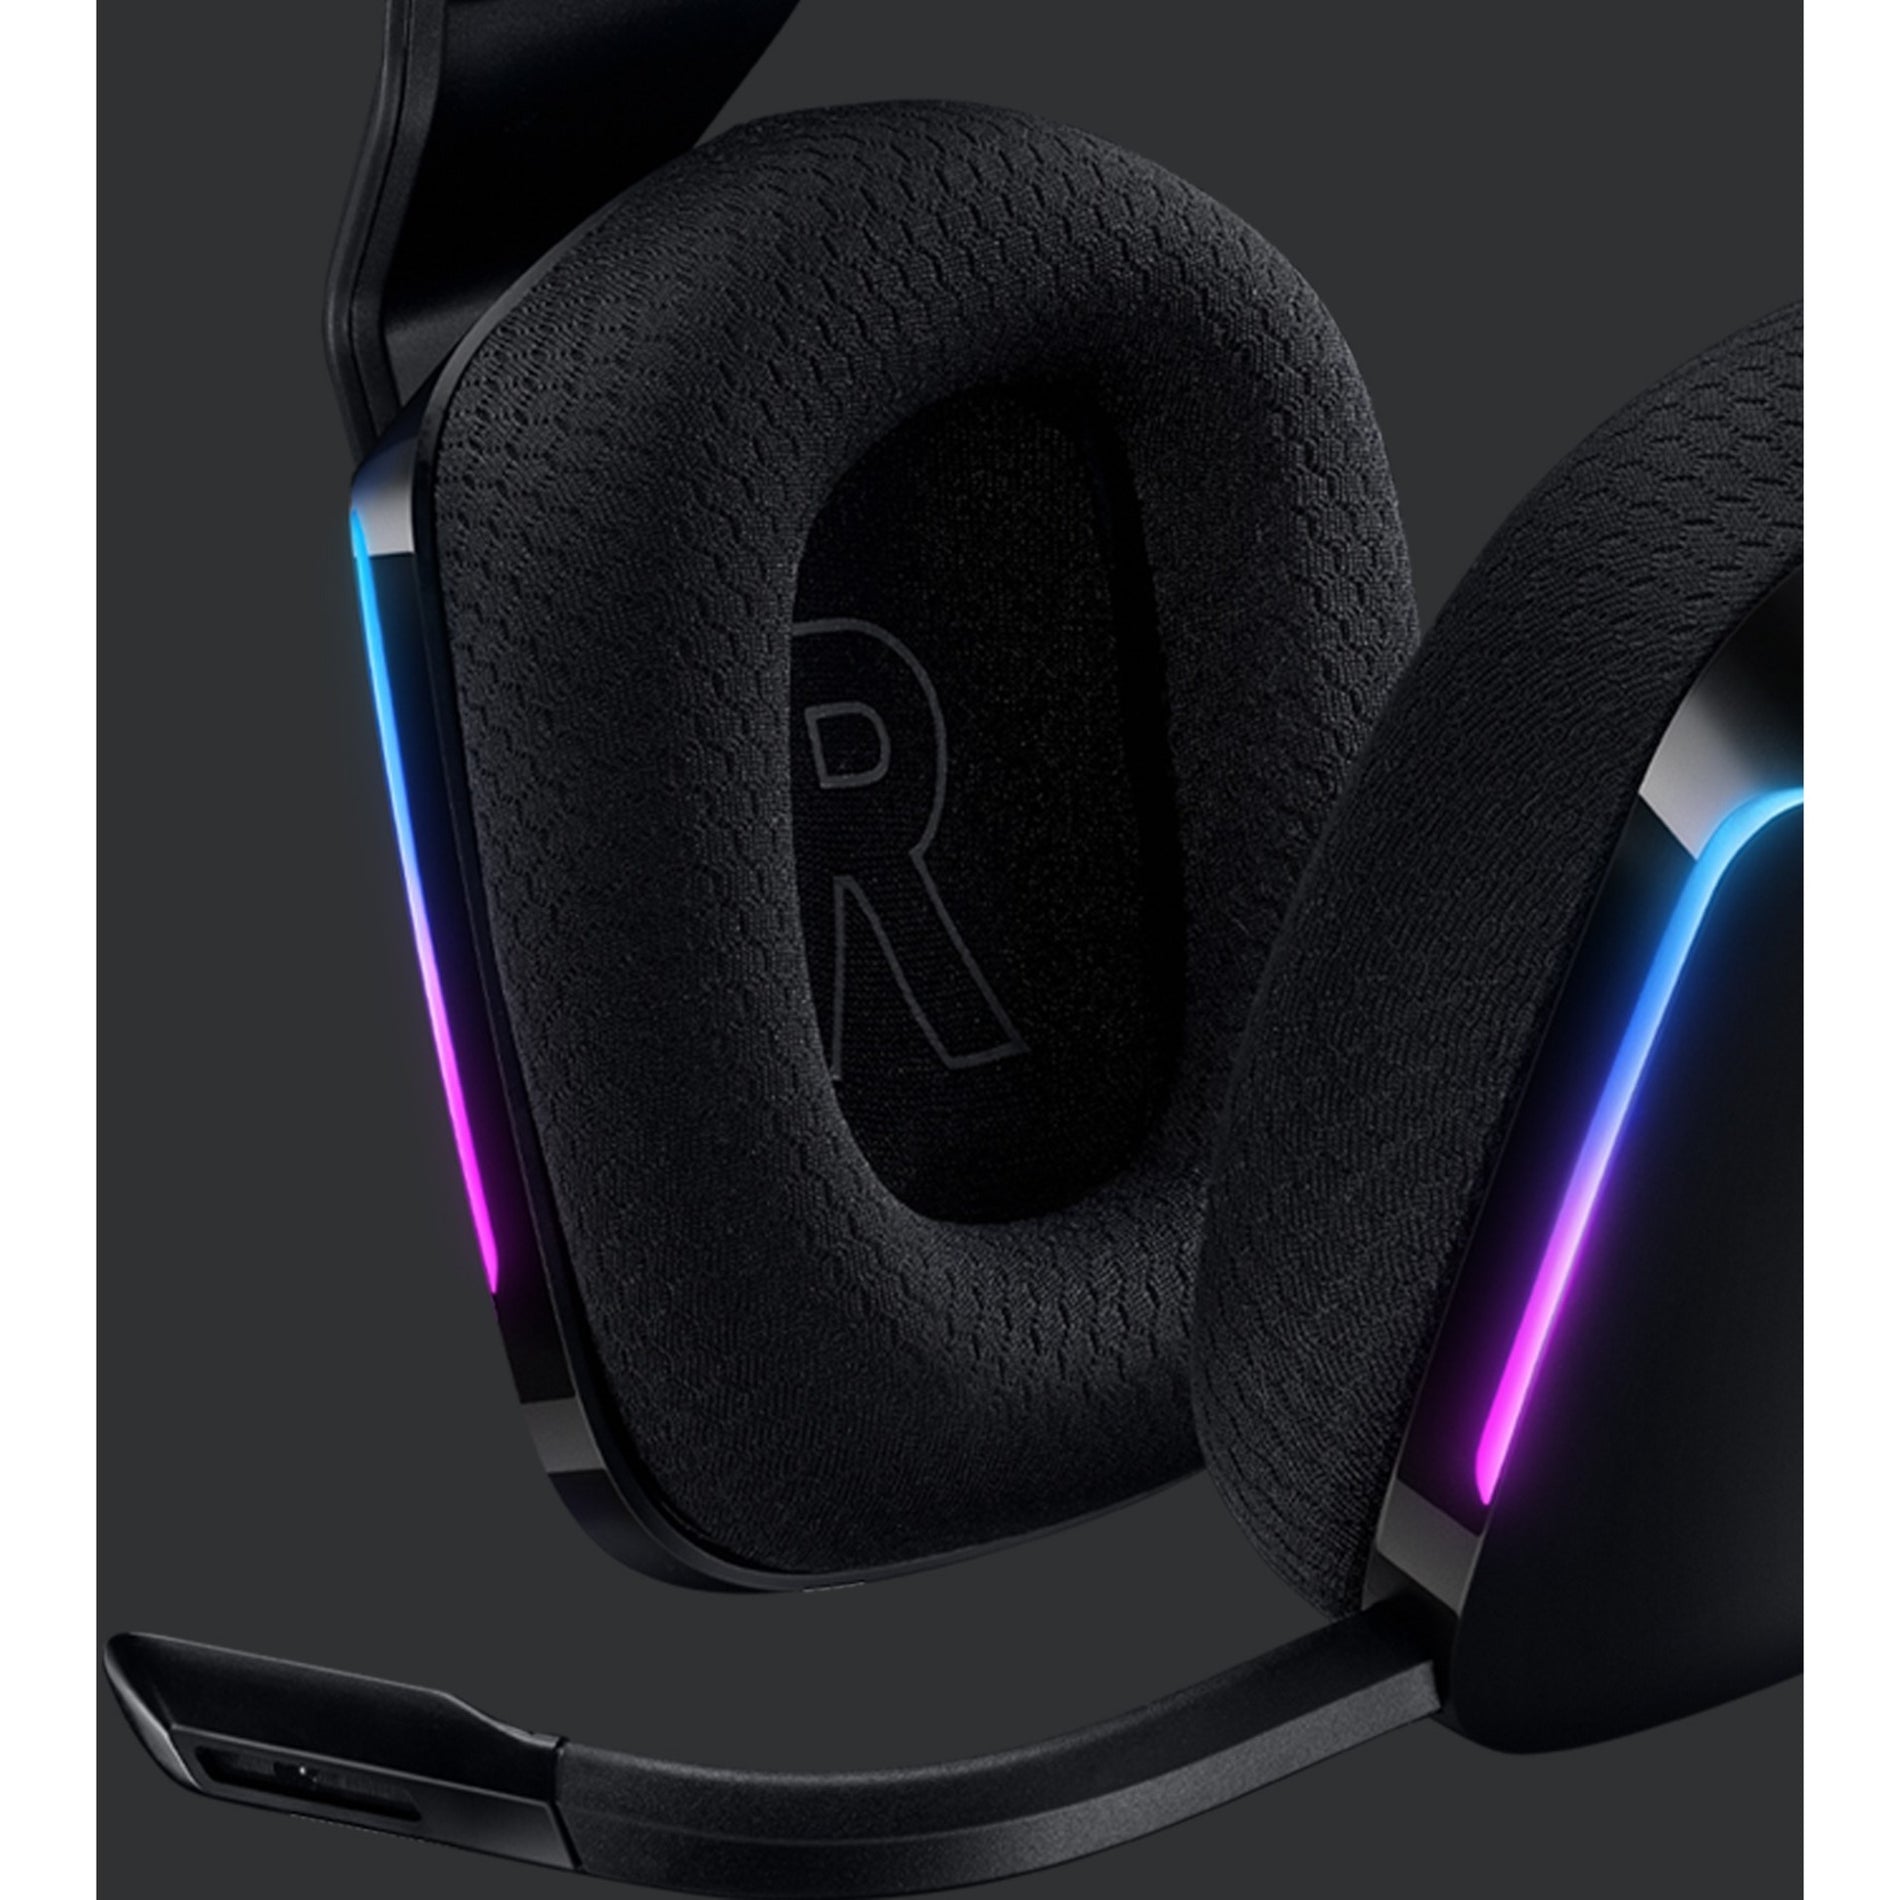  Logitech G733 LIGHTSPEED Wireless Gaming Headset with  suspension headband, LIGHTSYNC RGB, Blue VO!CE mic technology and PRO-G  audio drivers - Blue : Everything Else